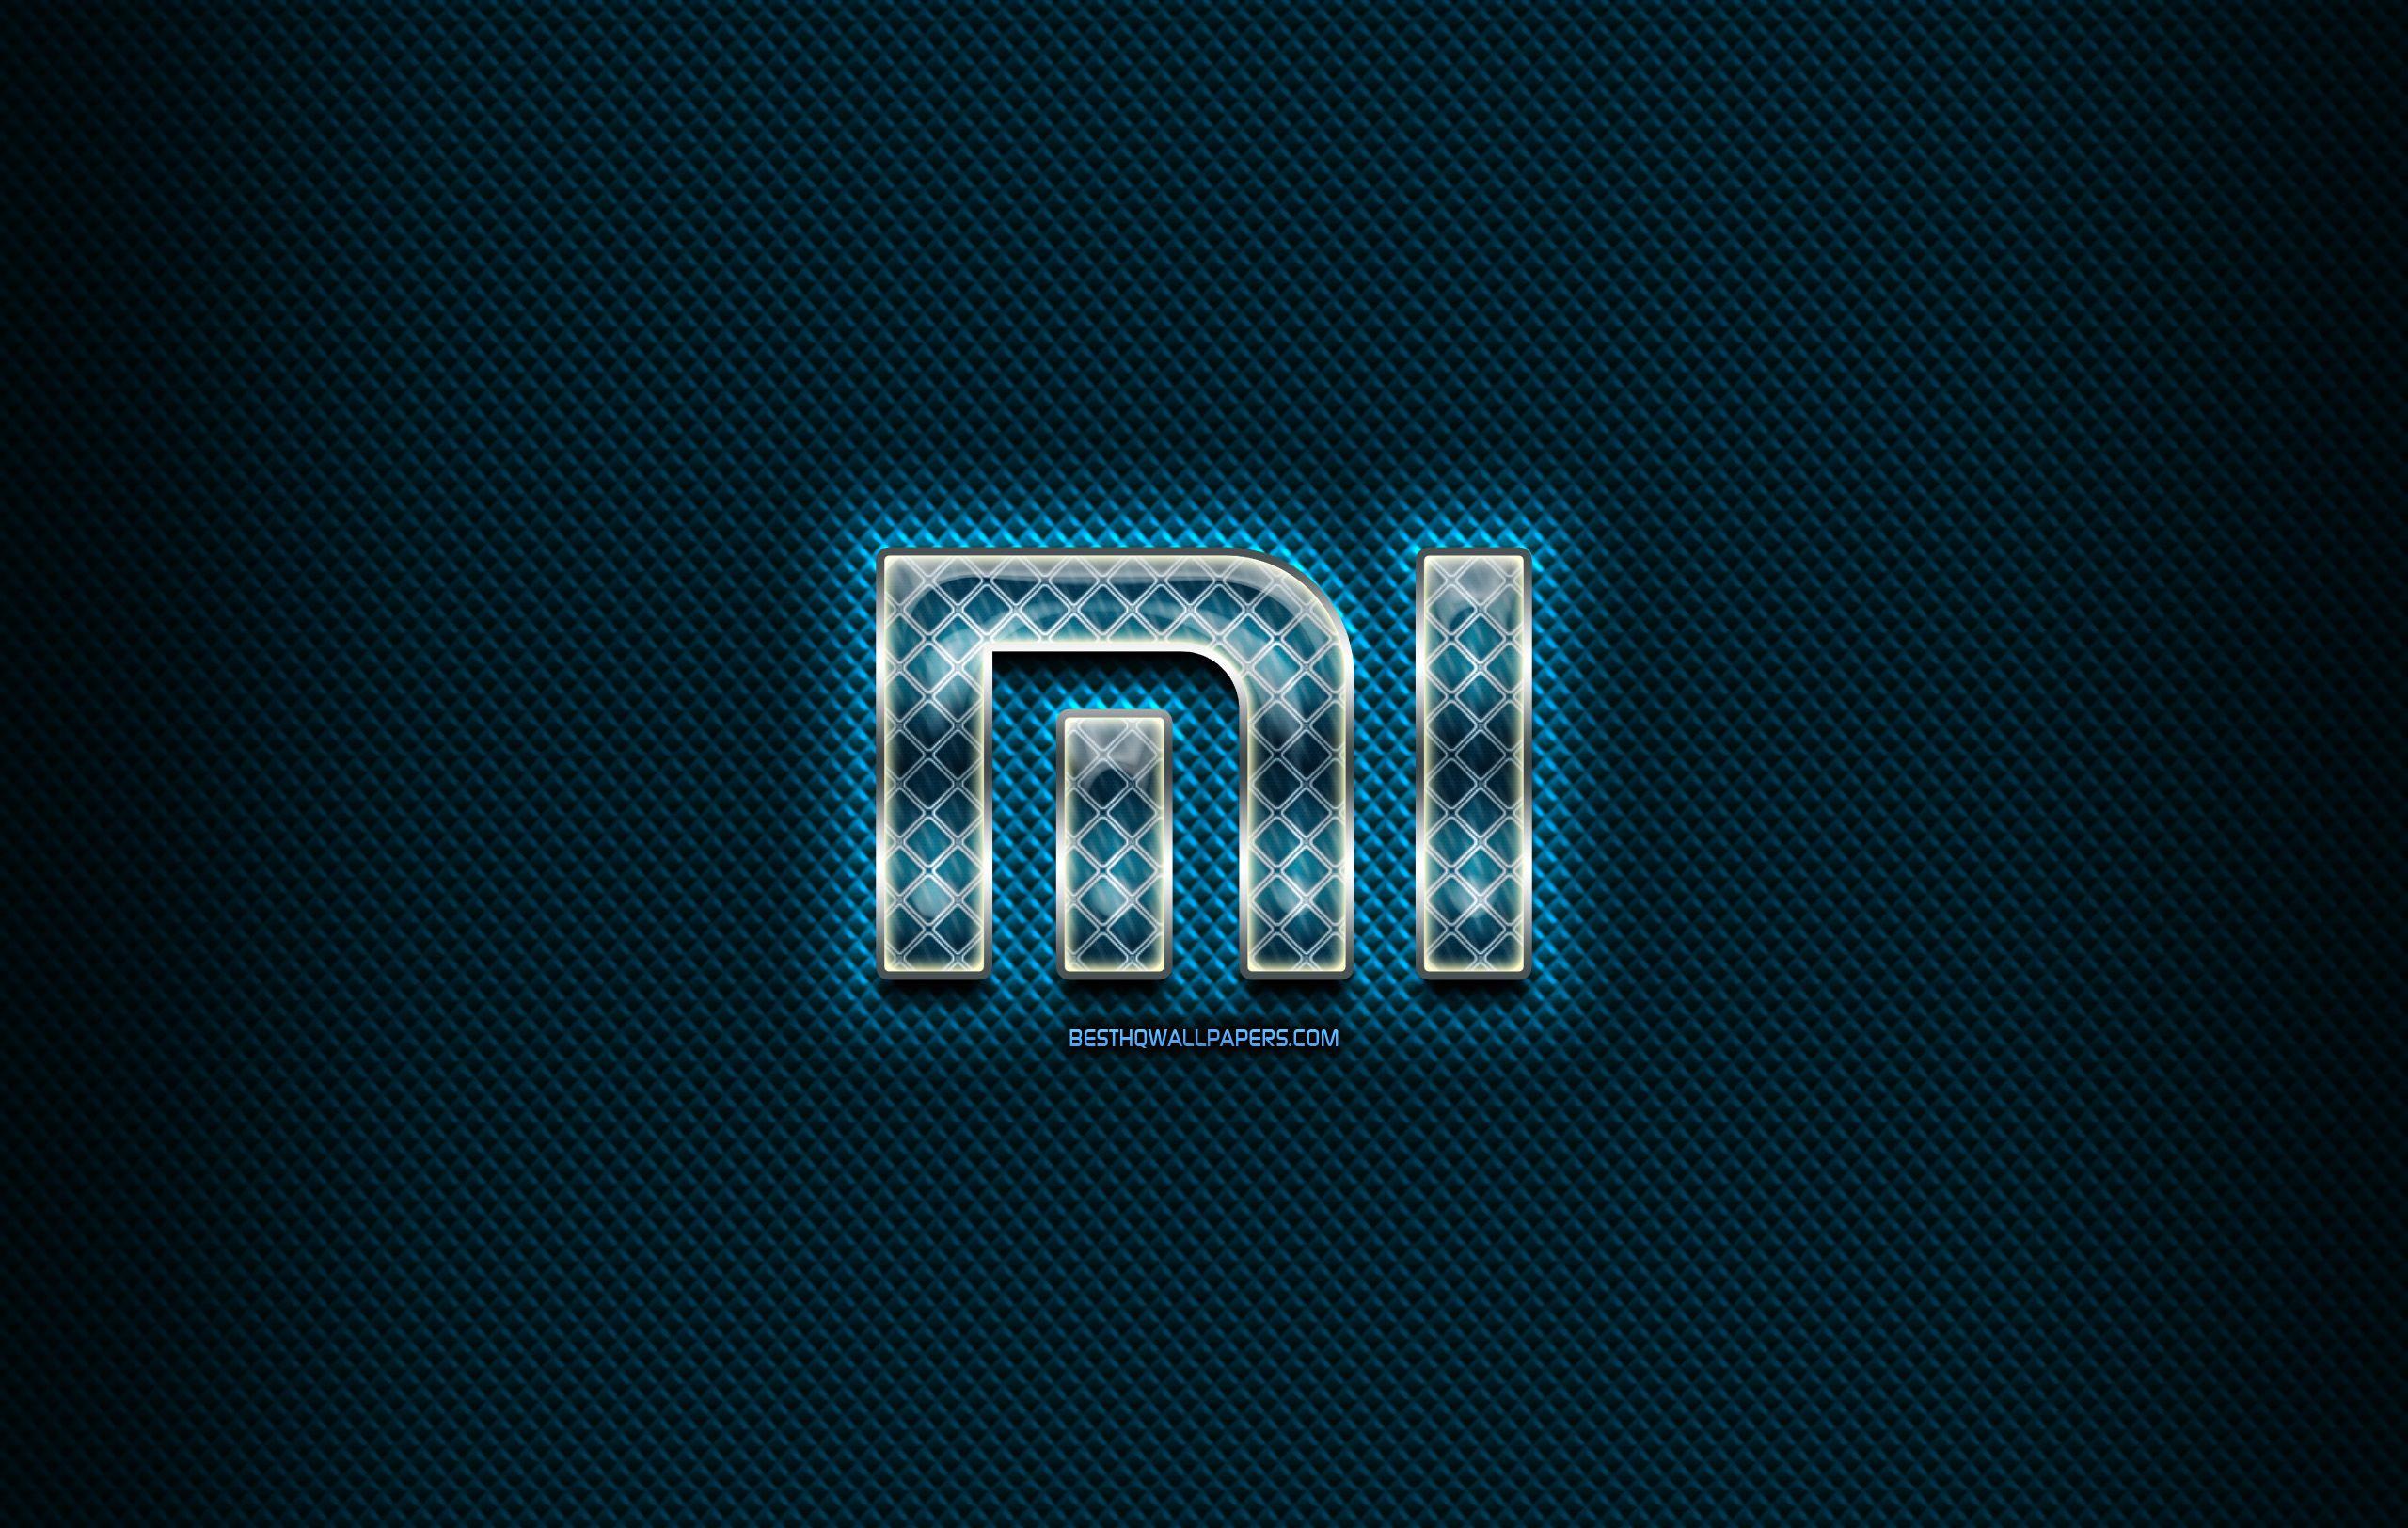 Xiaomi Logo Wallpaper - Download to your mobile from PHONEKY